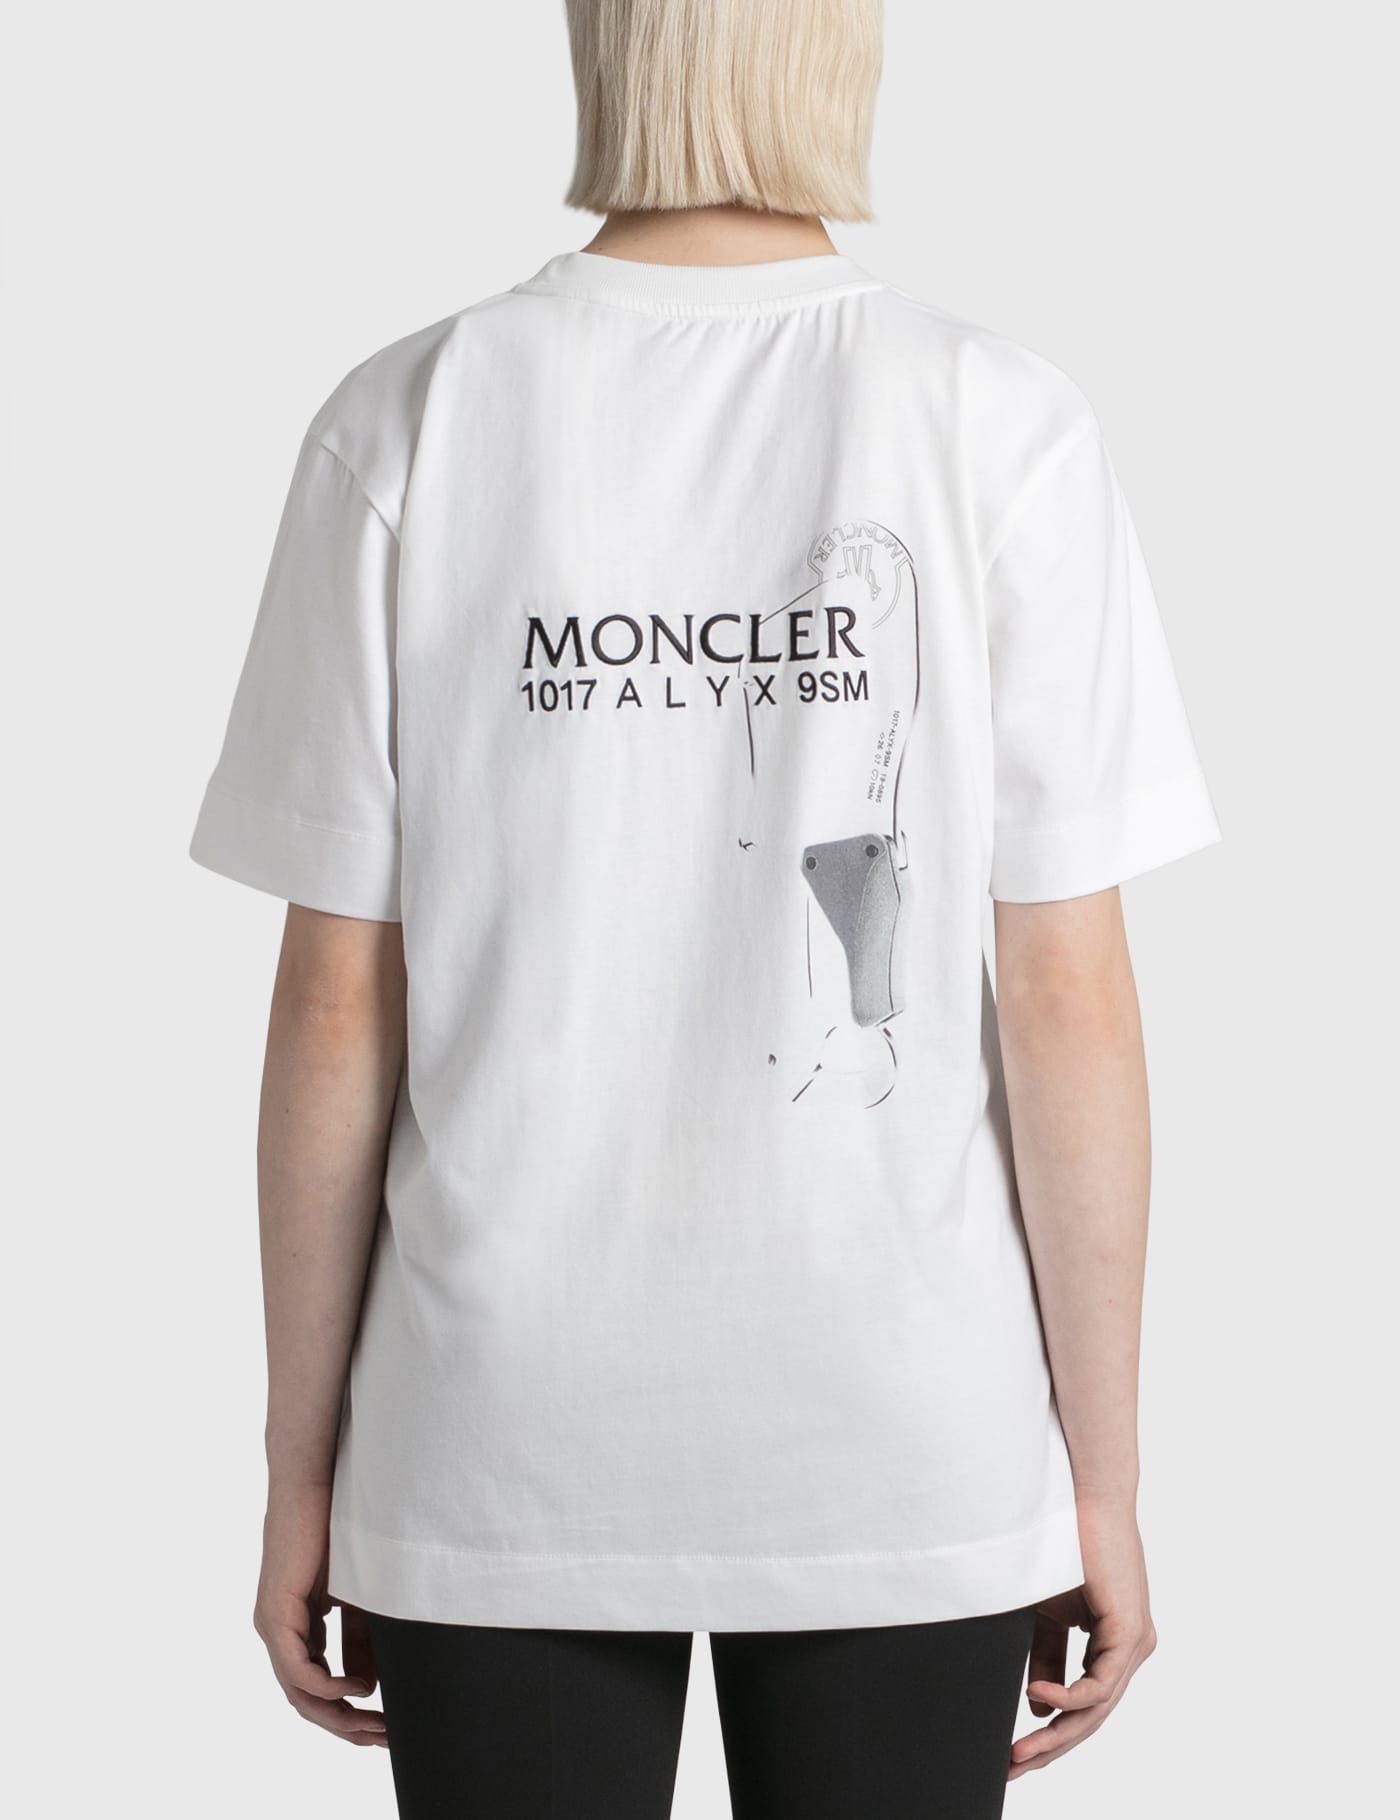 Moncler Genius - 6 Moncler Genius x 1017 ALYX 9SM Logo T-shirt | HBX -  Globally Curated Fashion and Lifestyle by Hypebeast